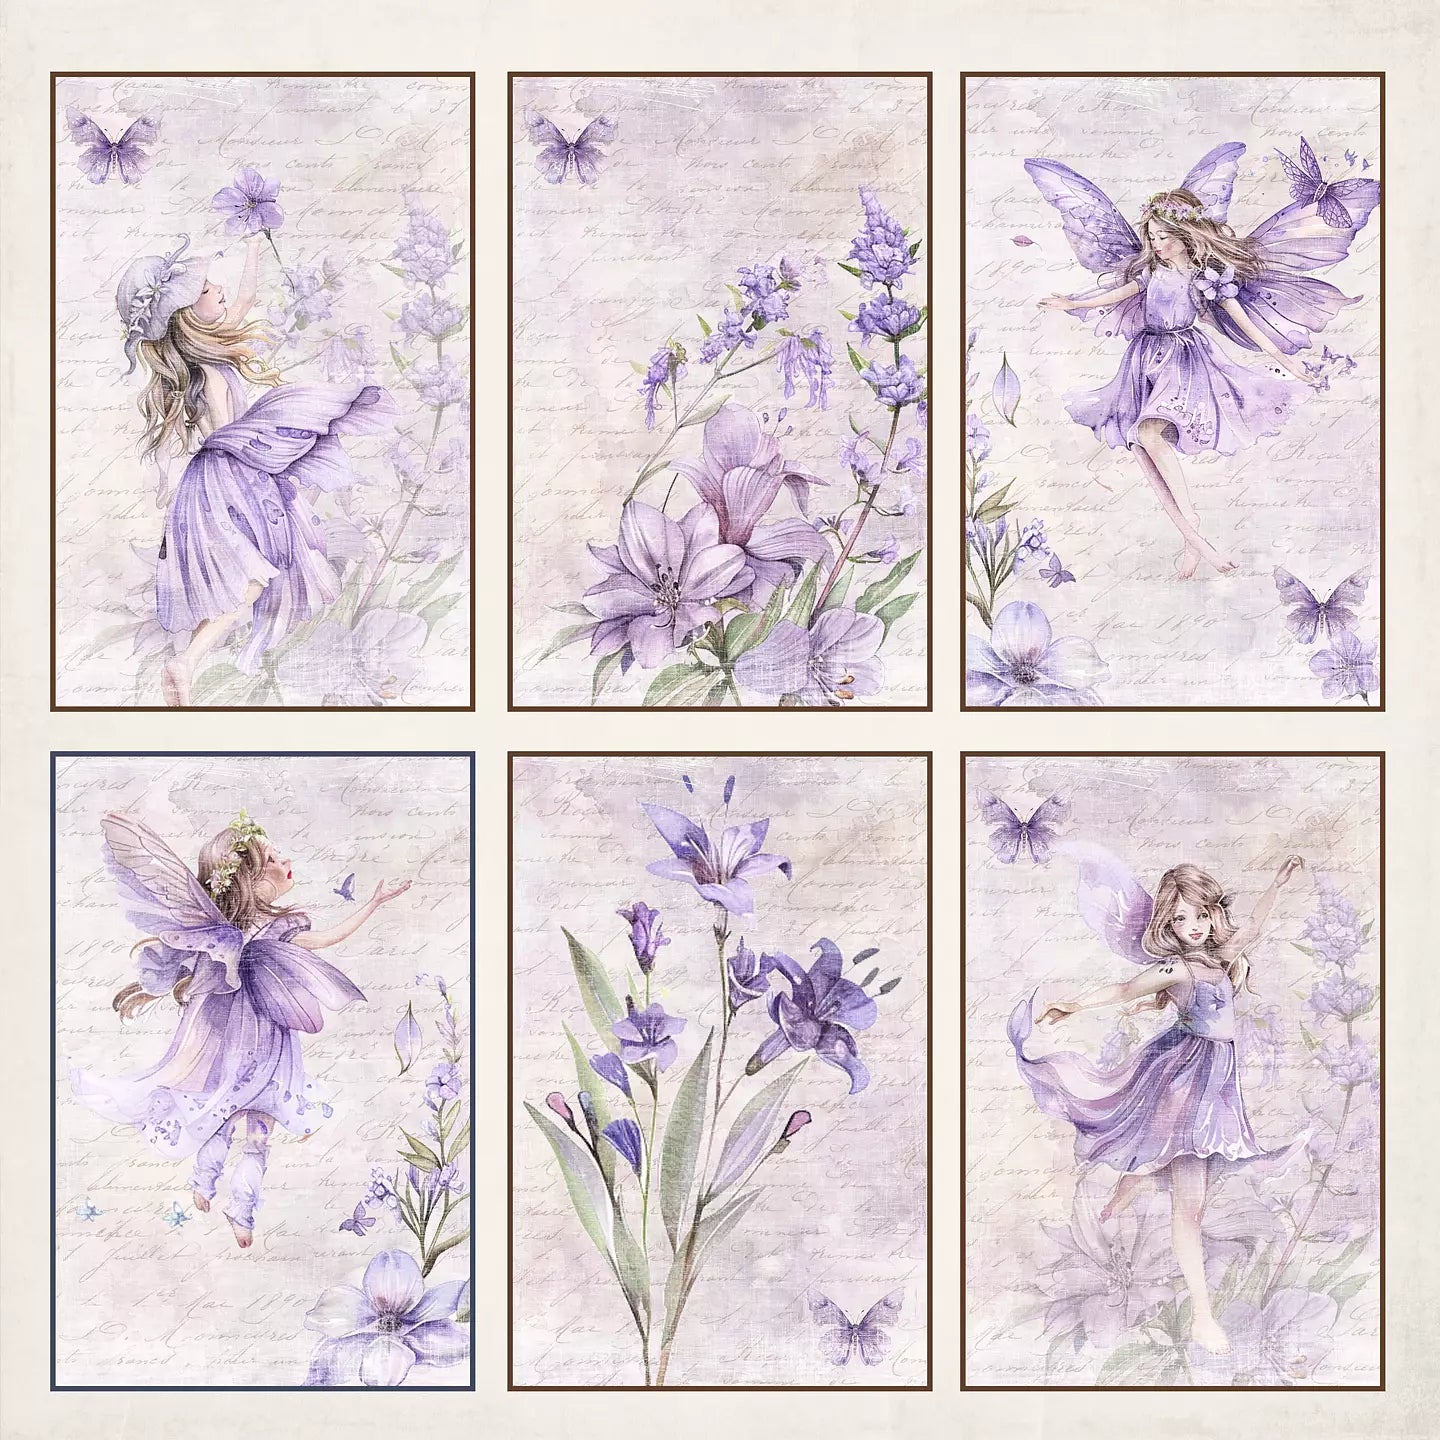 NYHET! Reprint Paperpack - Fairies Collection Paperpack - 8 X 8